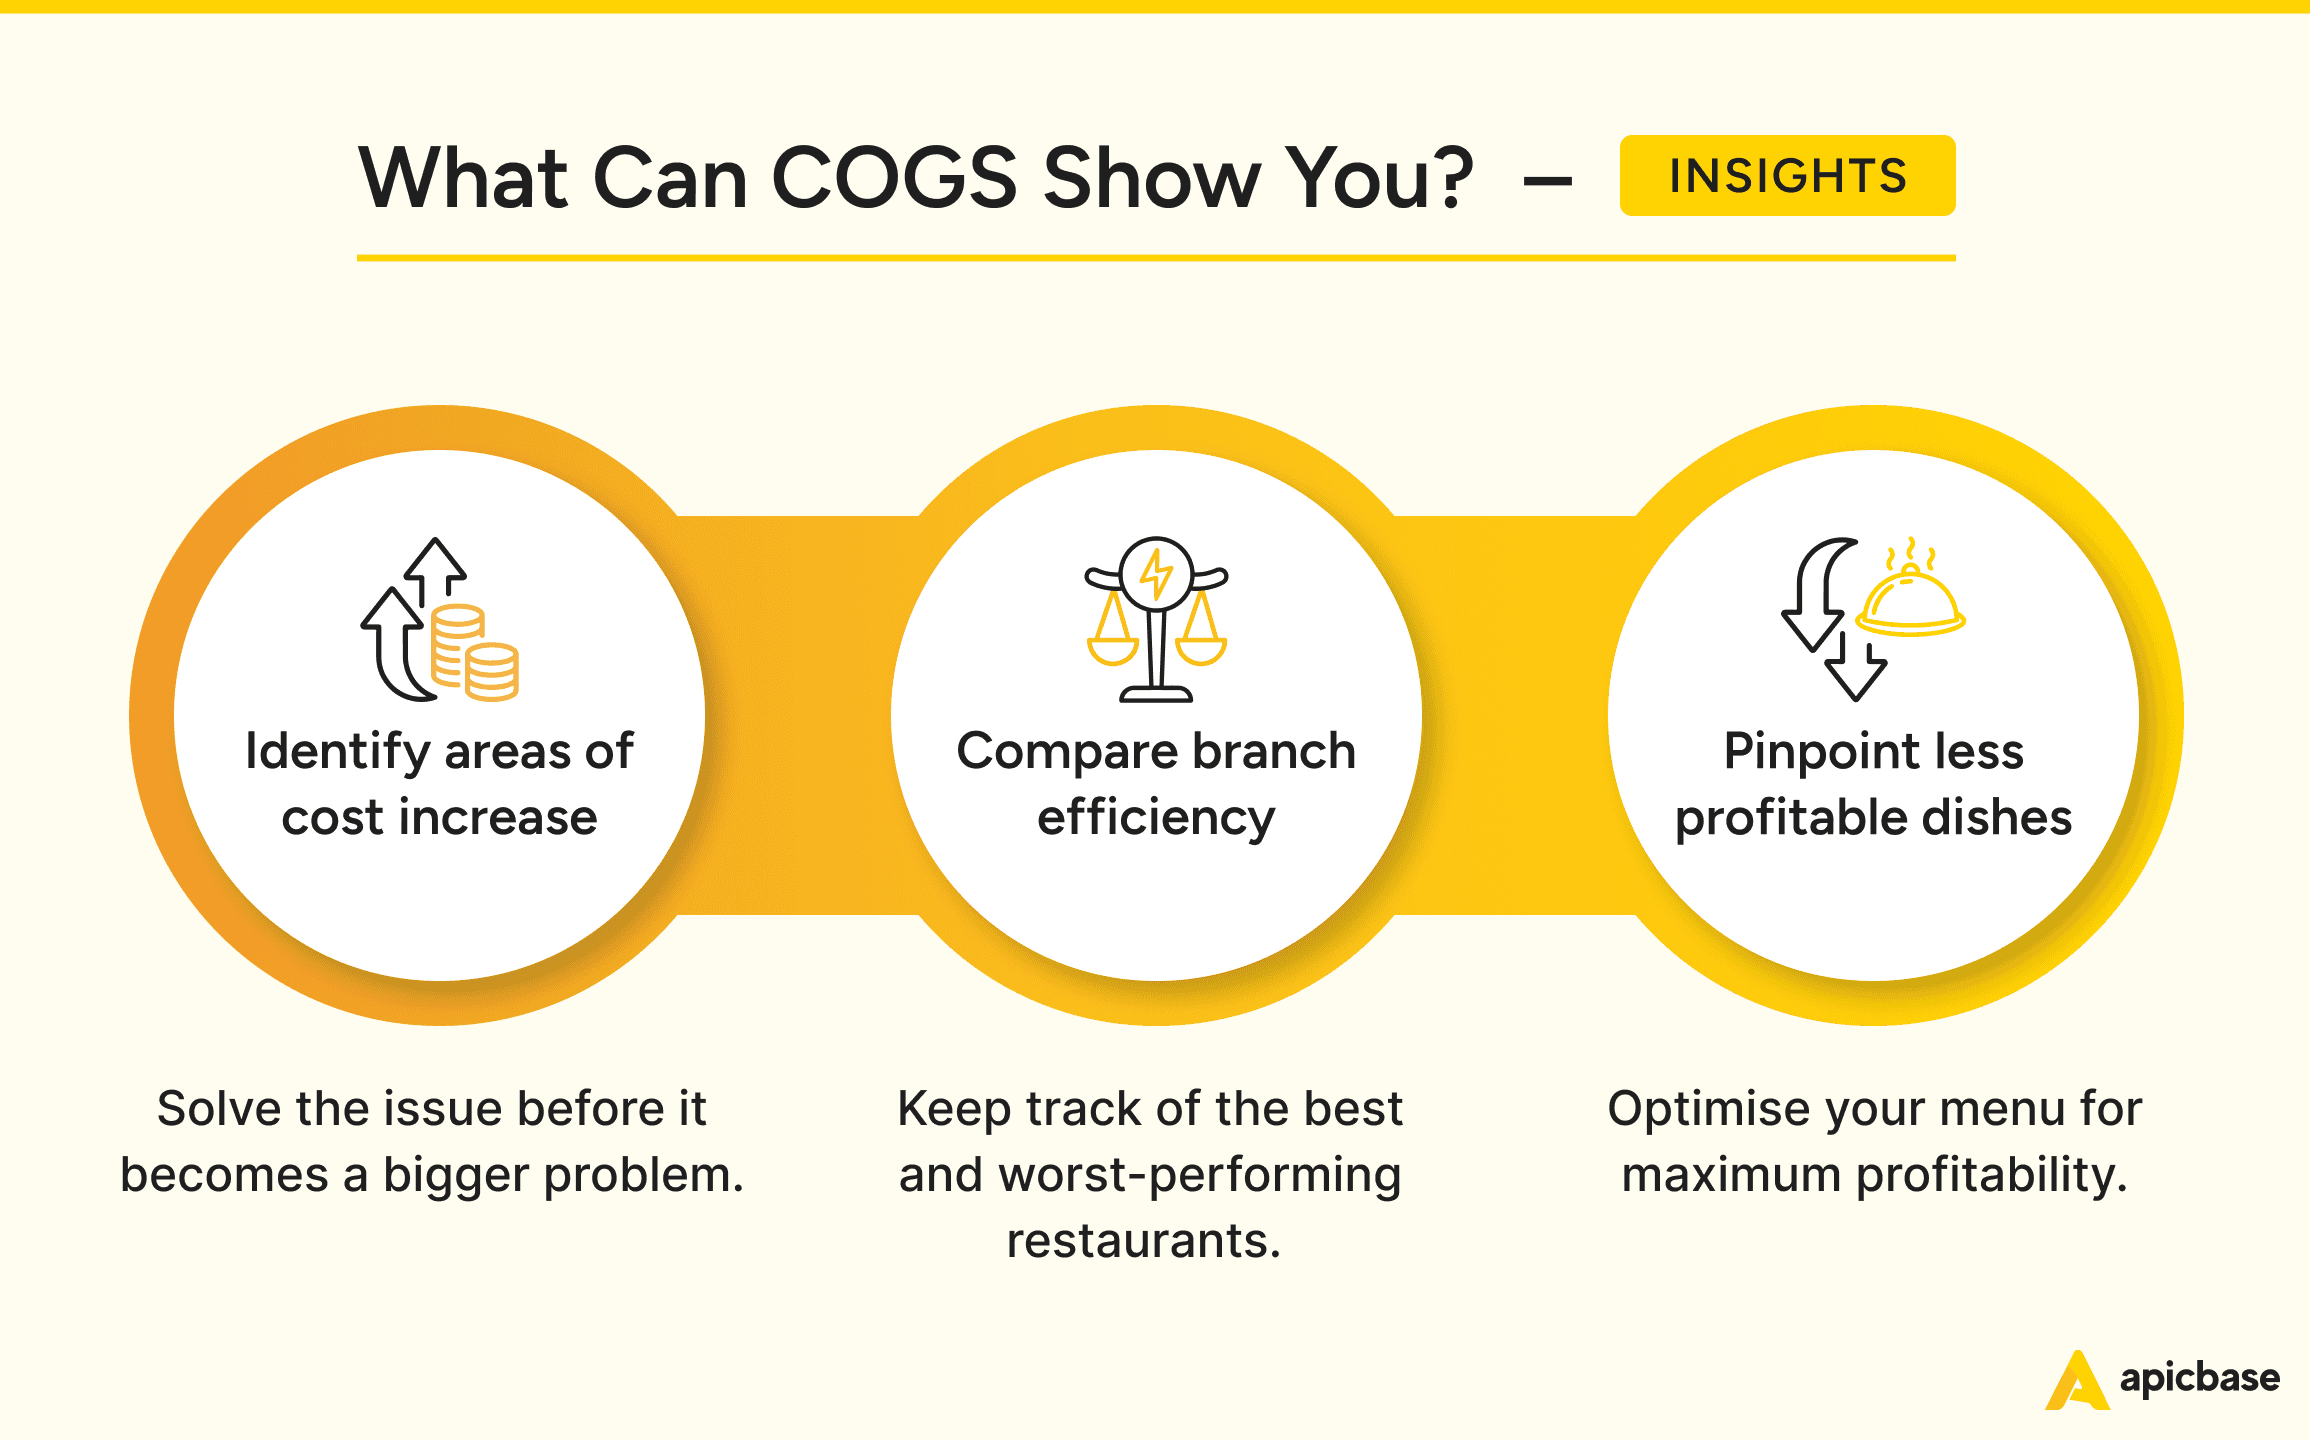 What Can COGS Show You?